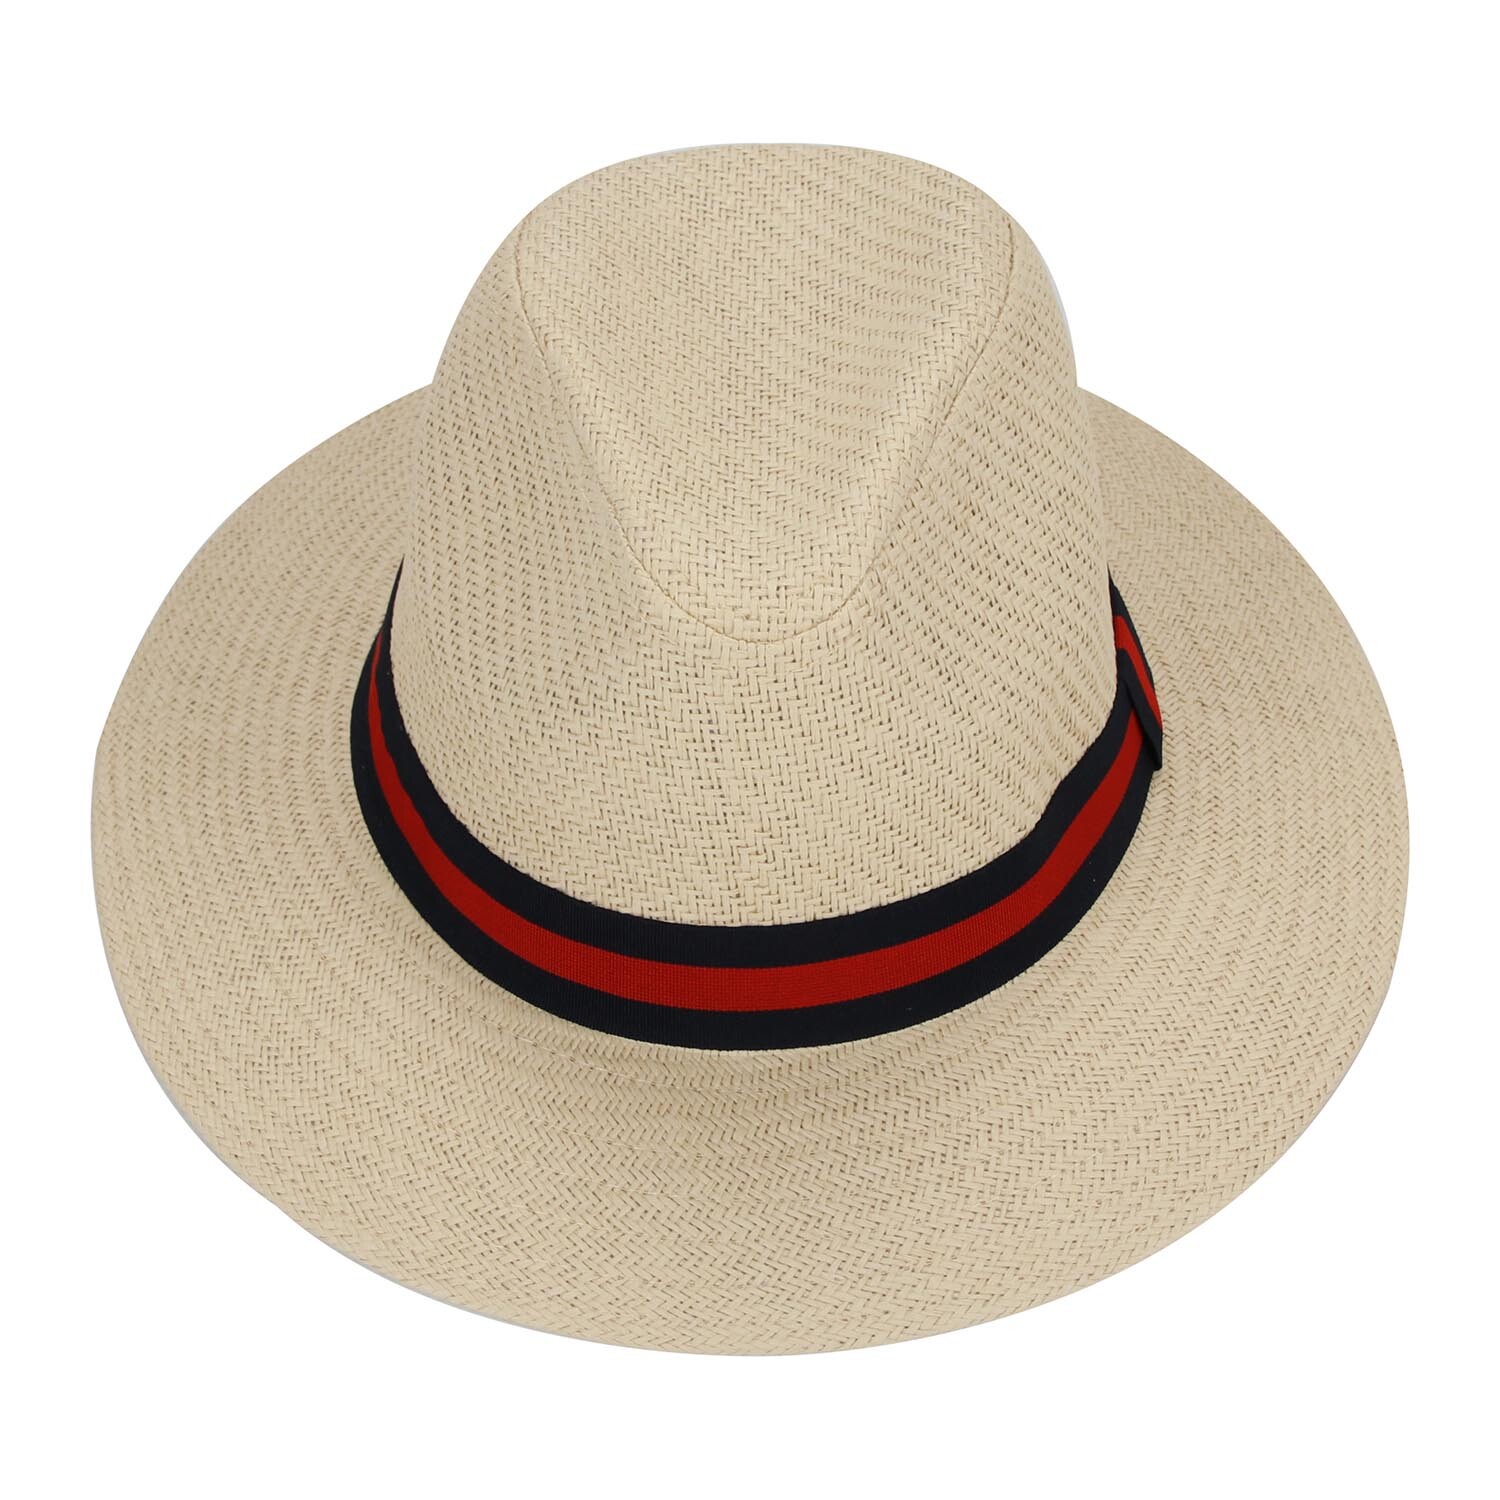 Red Band Straw Hat - Natural Image 3